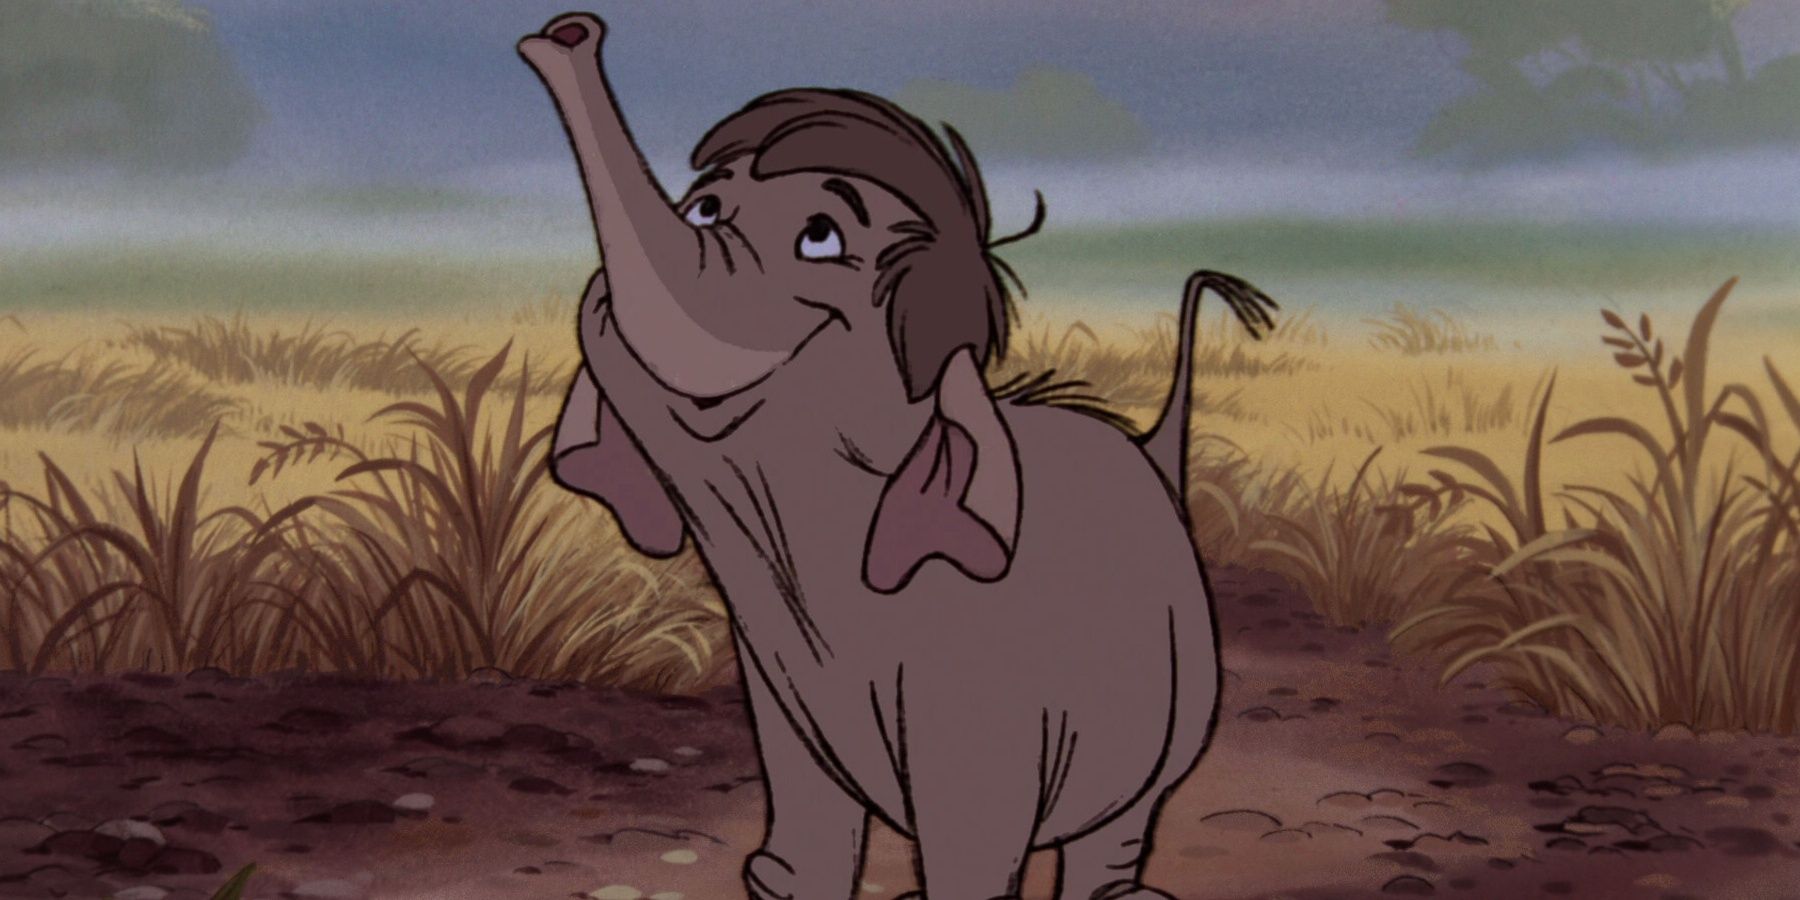 Junior from Disney's The Jungle Book